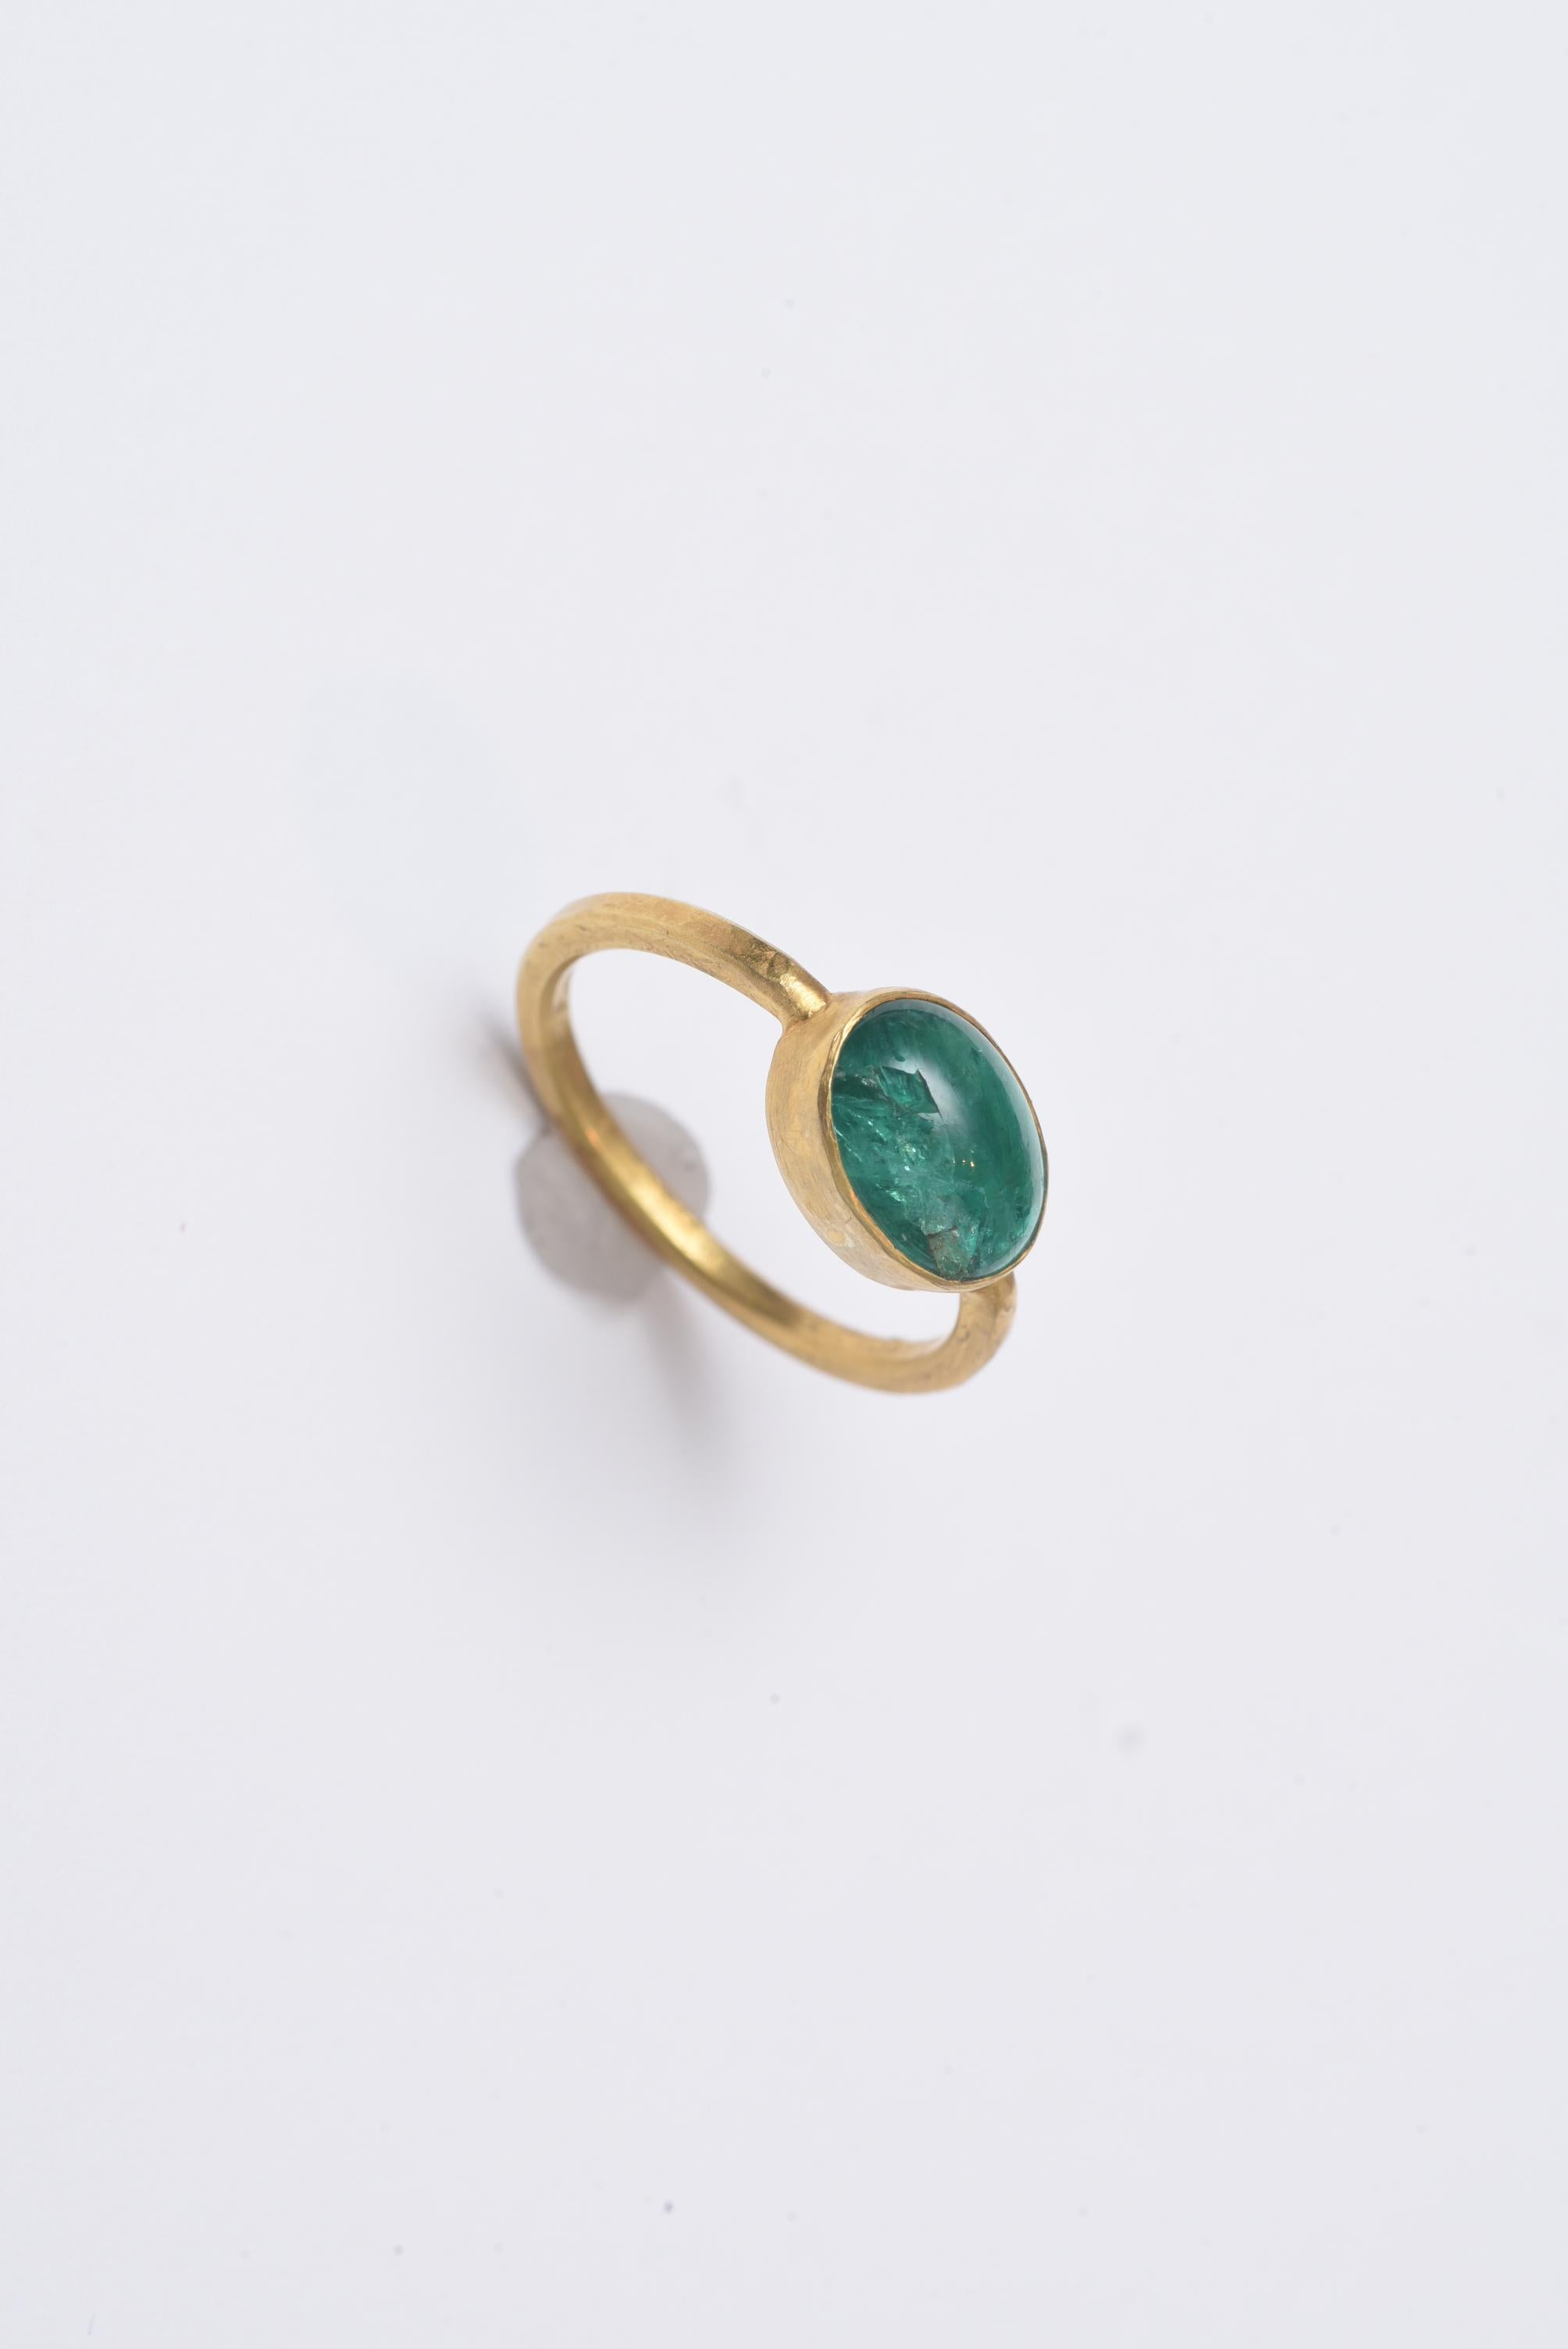 Women's or Men's Cabochon Emerald and 22 Karat Gold Ring